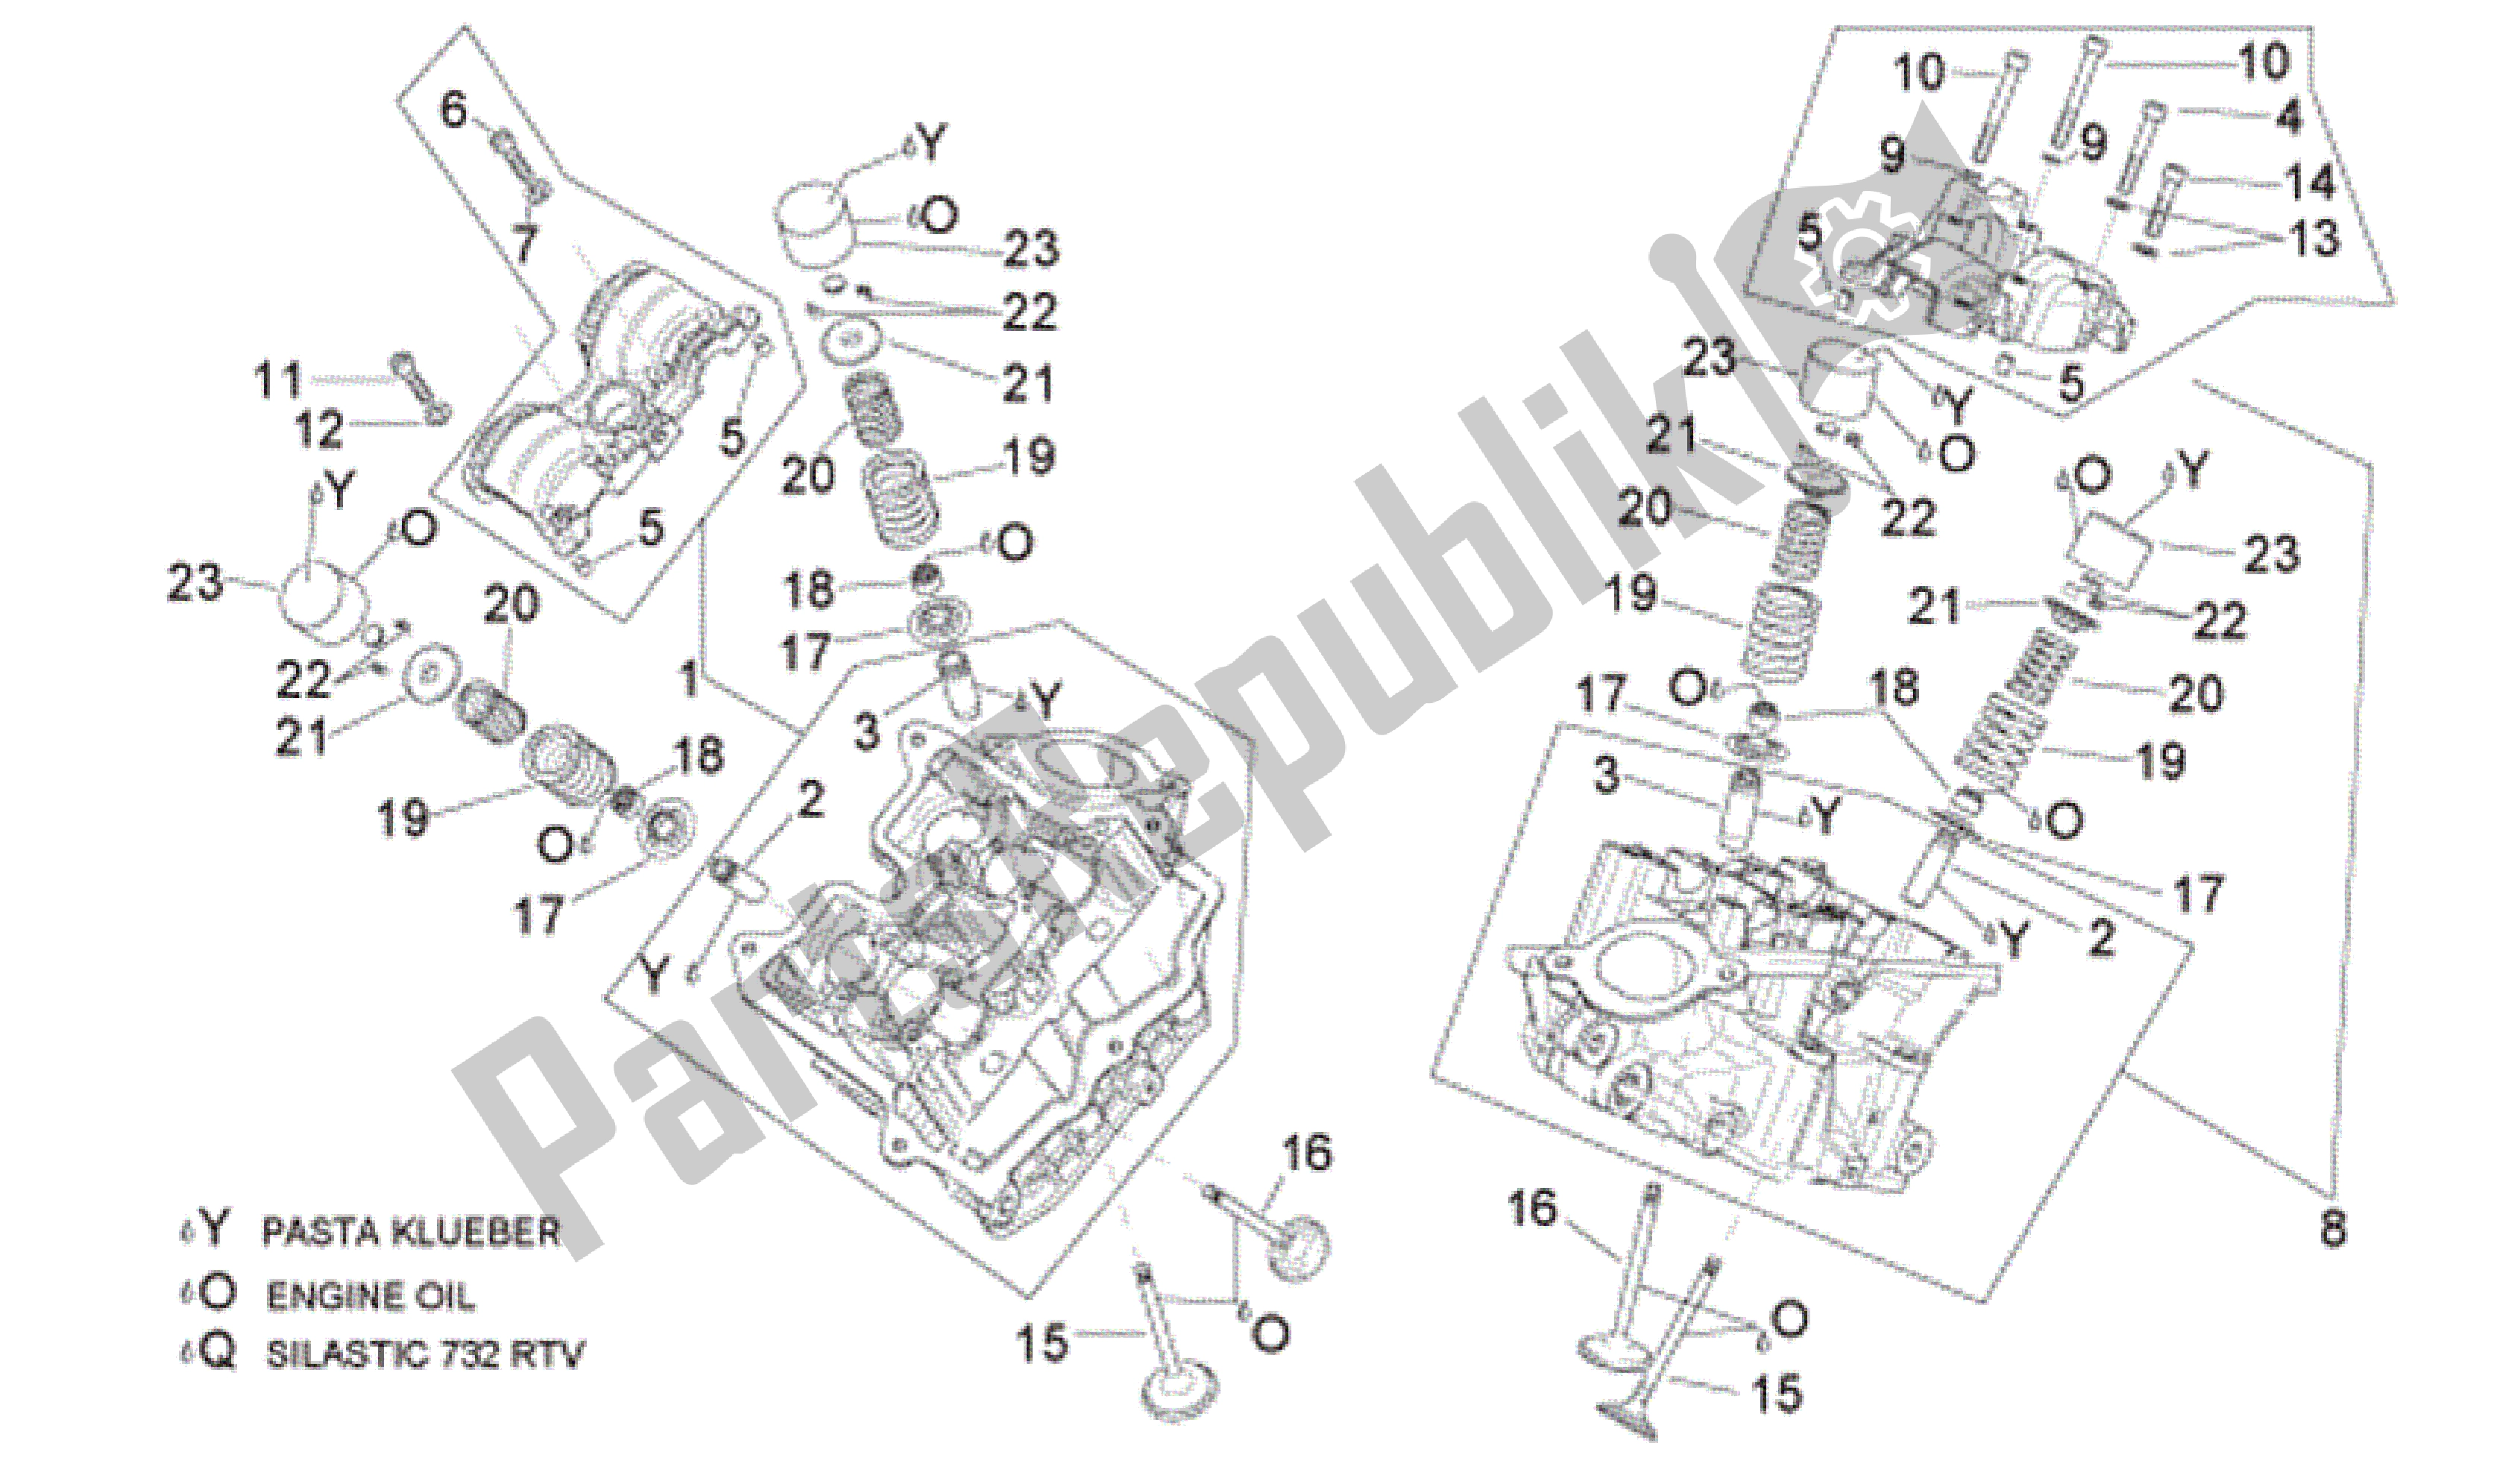 All parts for the Cylinder Head And Valves of the Aprilia RSV Tuono Factory 3985 1000 2006 - 2009